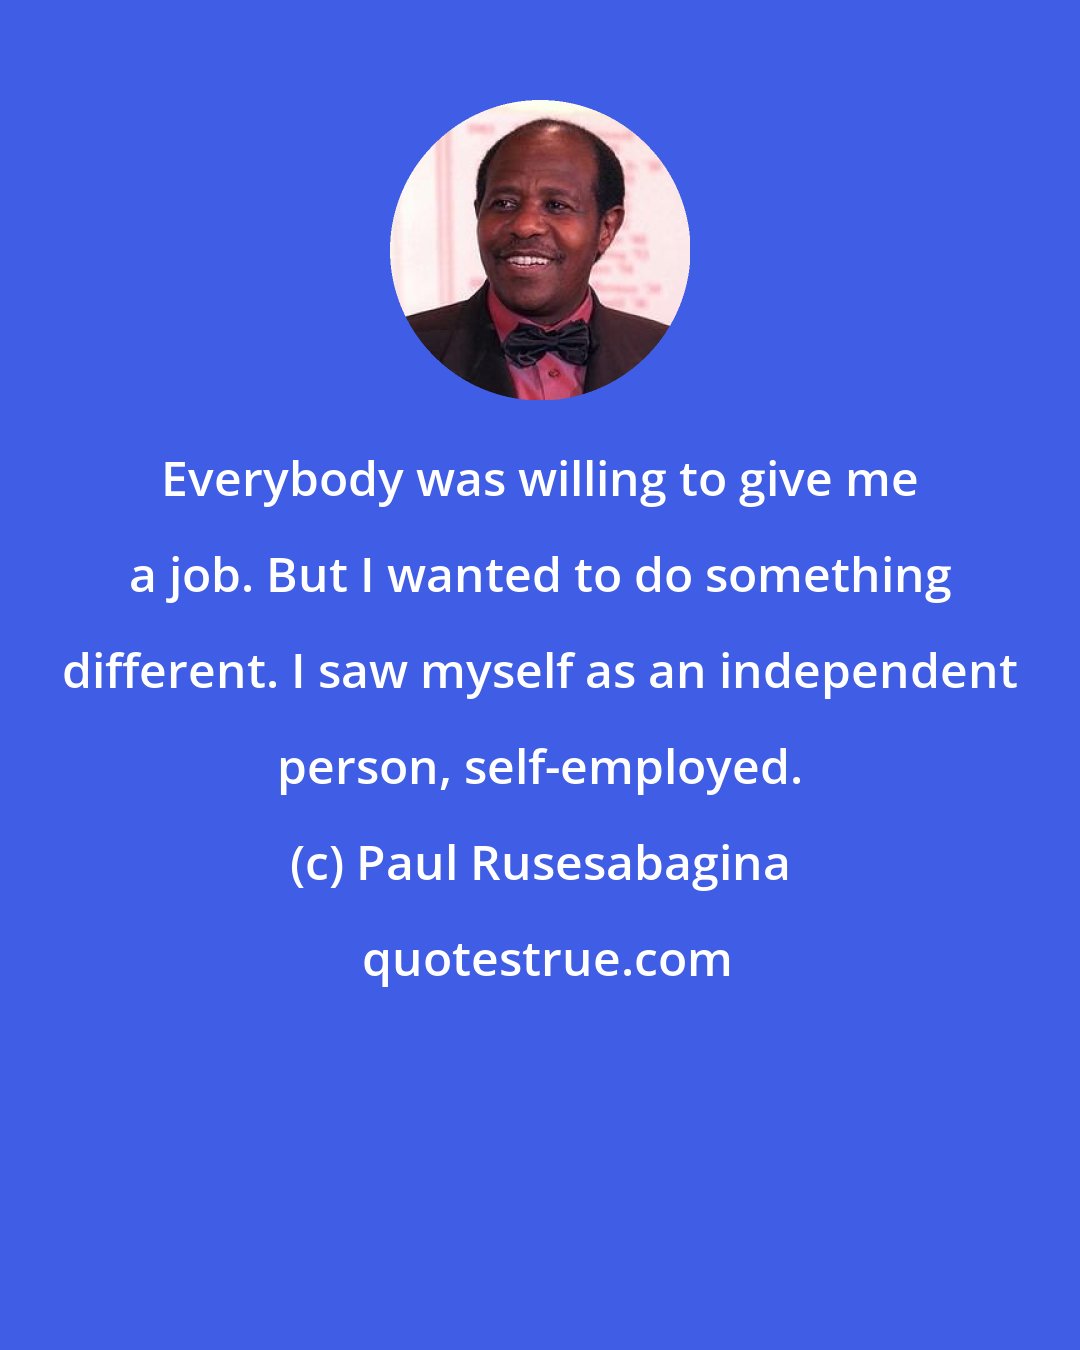 Paul Rusesabagina: Everybody was willing to give me a job. But I wanted to do something different. I saw myself as an independent person, self-employed.